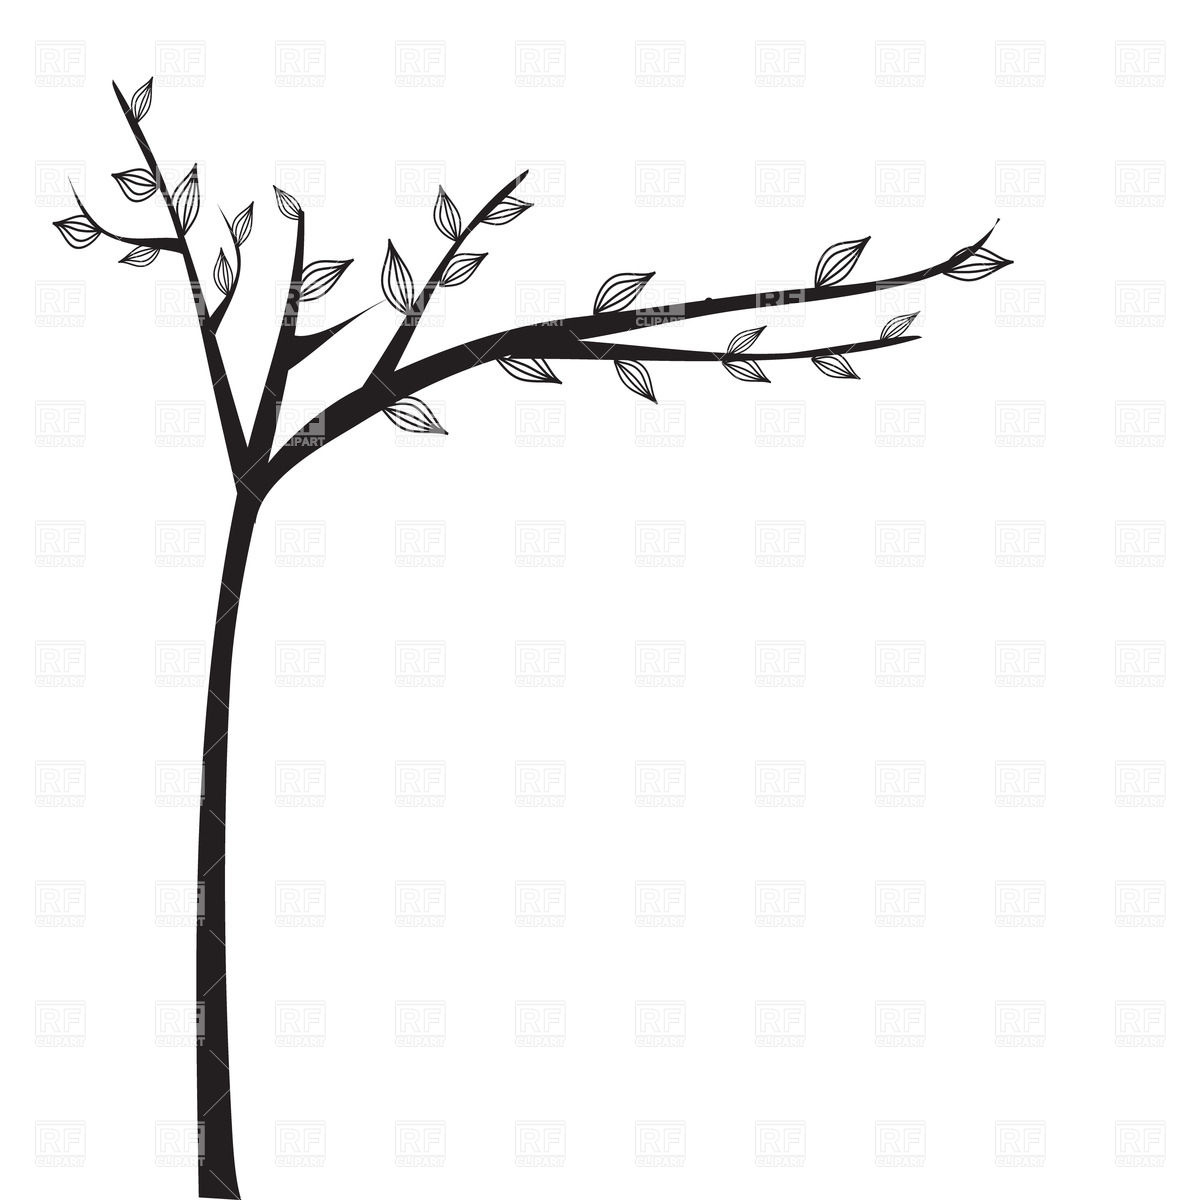 Abstract Black Tree Silhouette 23121 Download Royalty Free Vector